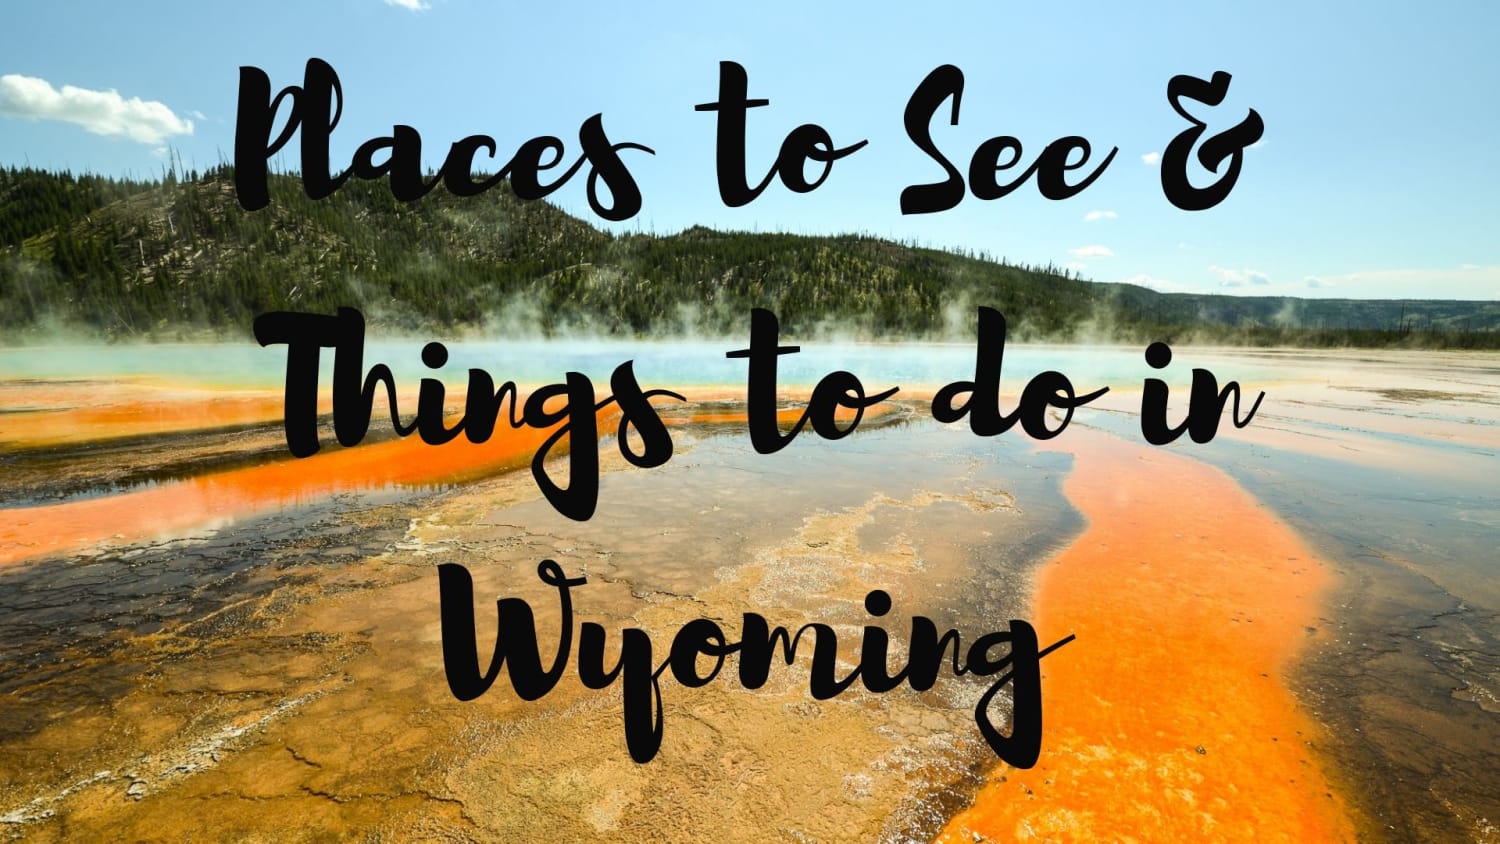 Places to See & Things to do in Wyoming